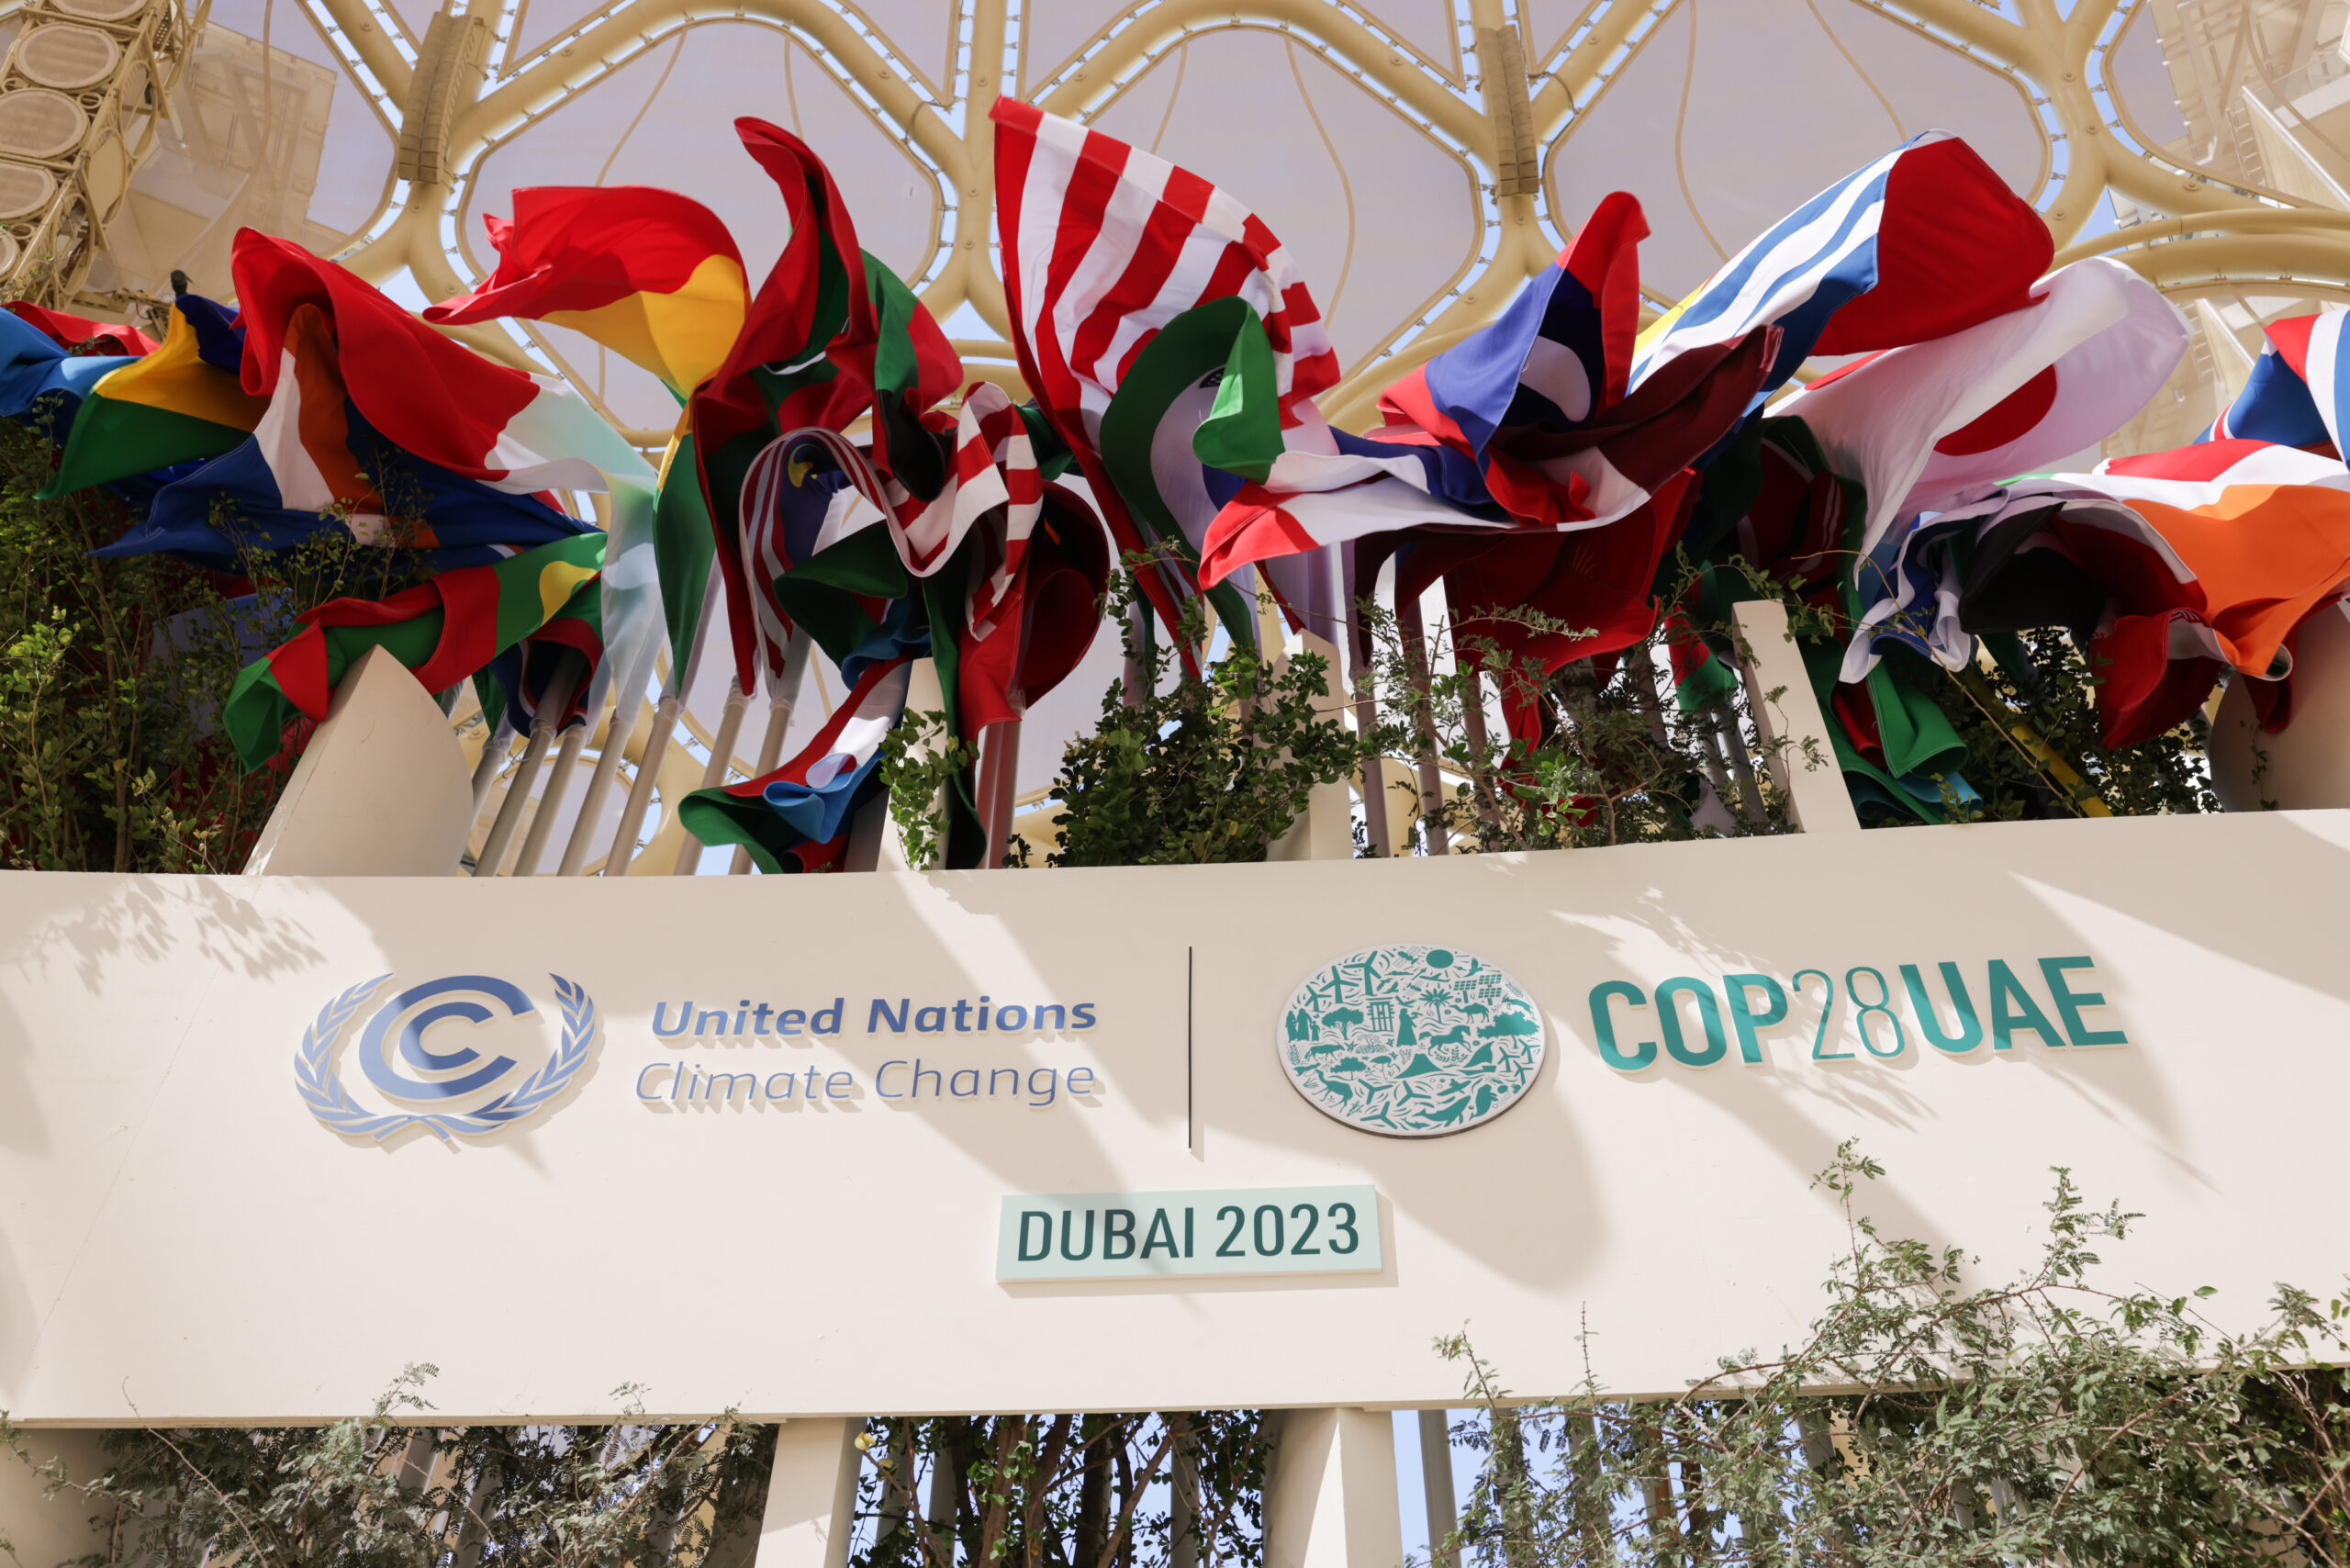 The UN climate summit in Dubai: Global warming and decarbonisation among controversies